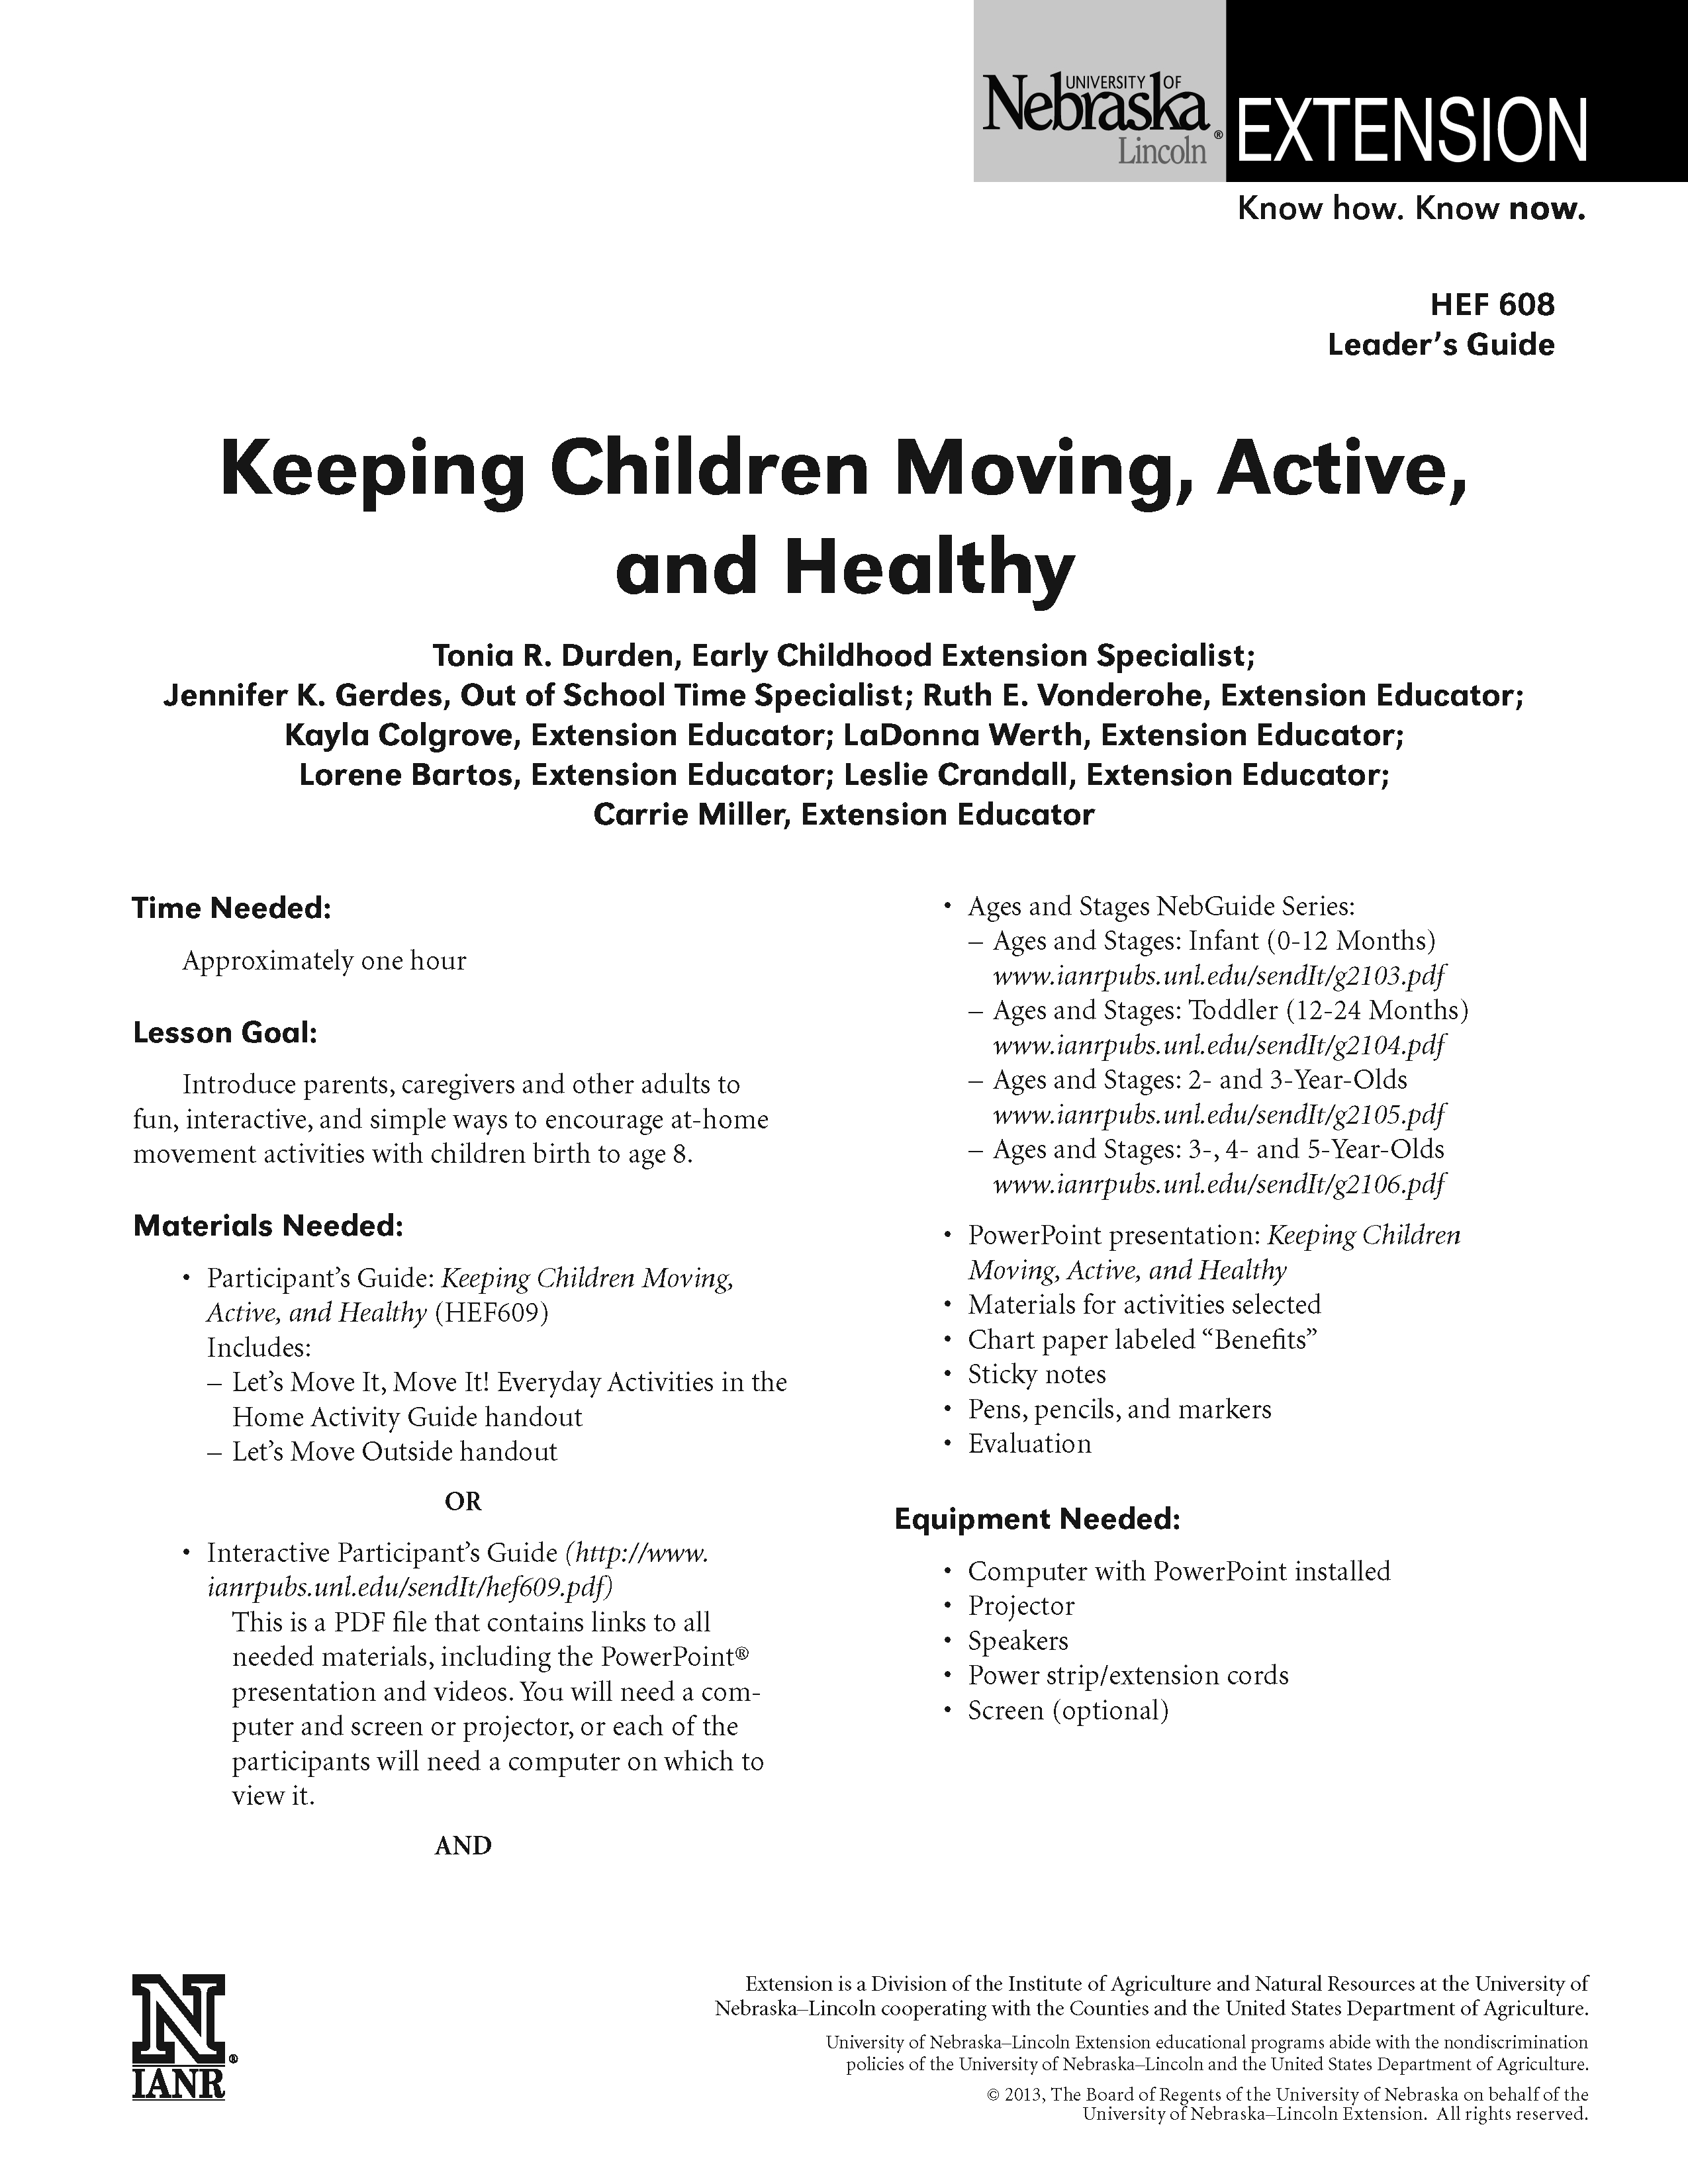 Keeping Children Moving, Active, and Healthy Leader Guide